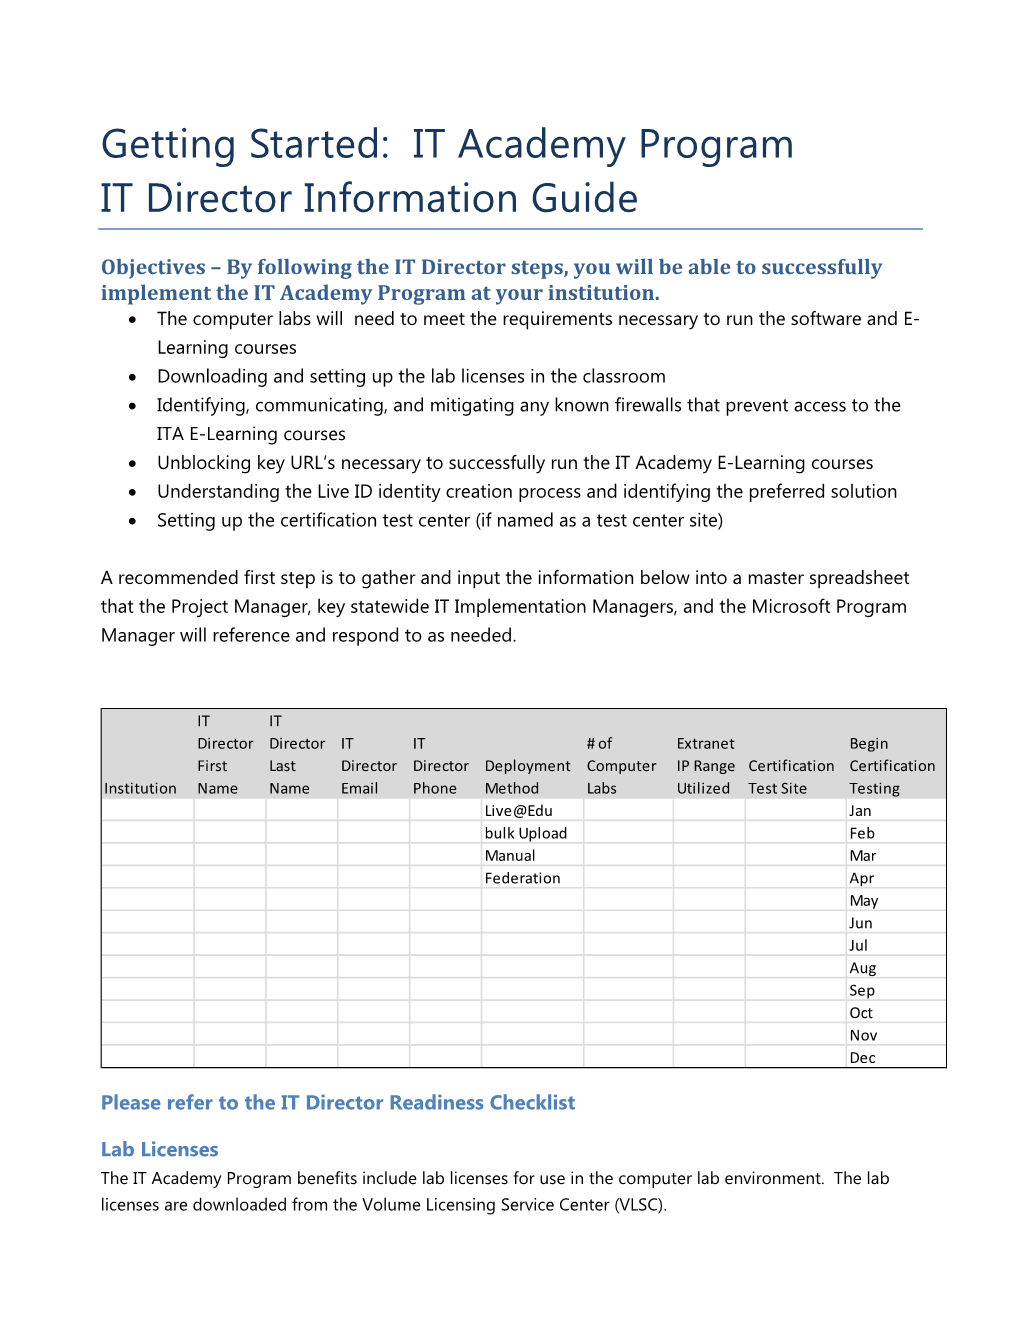 Getting Started: IT Academy Program IT Director Information Guide